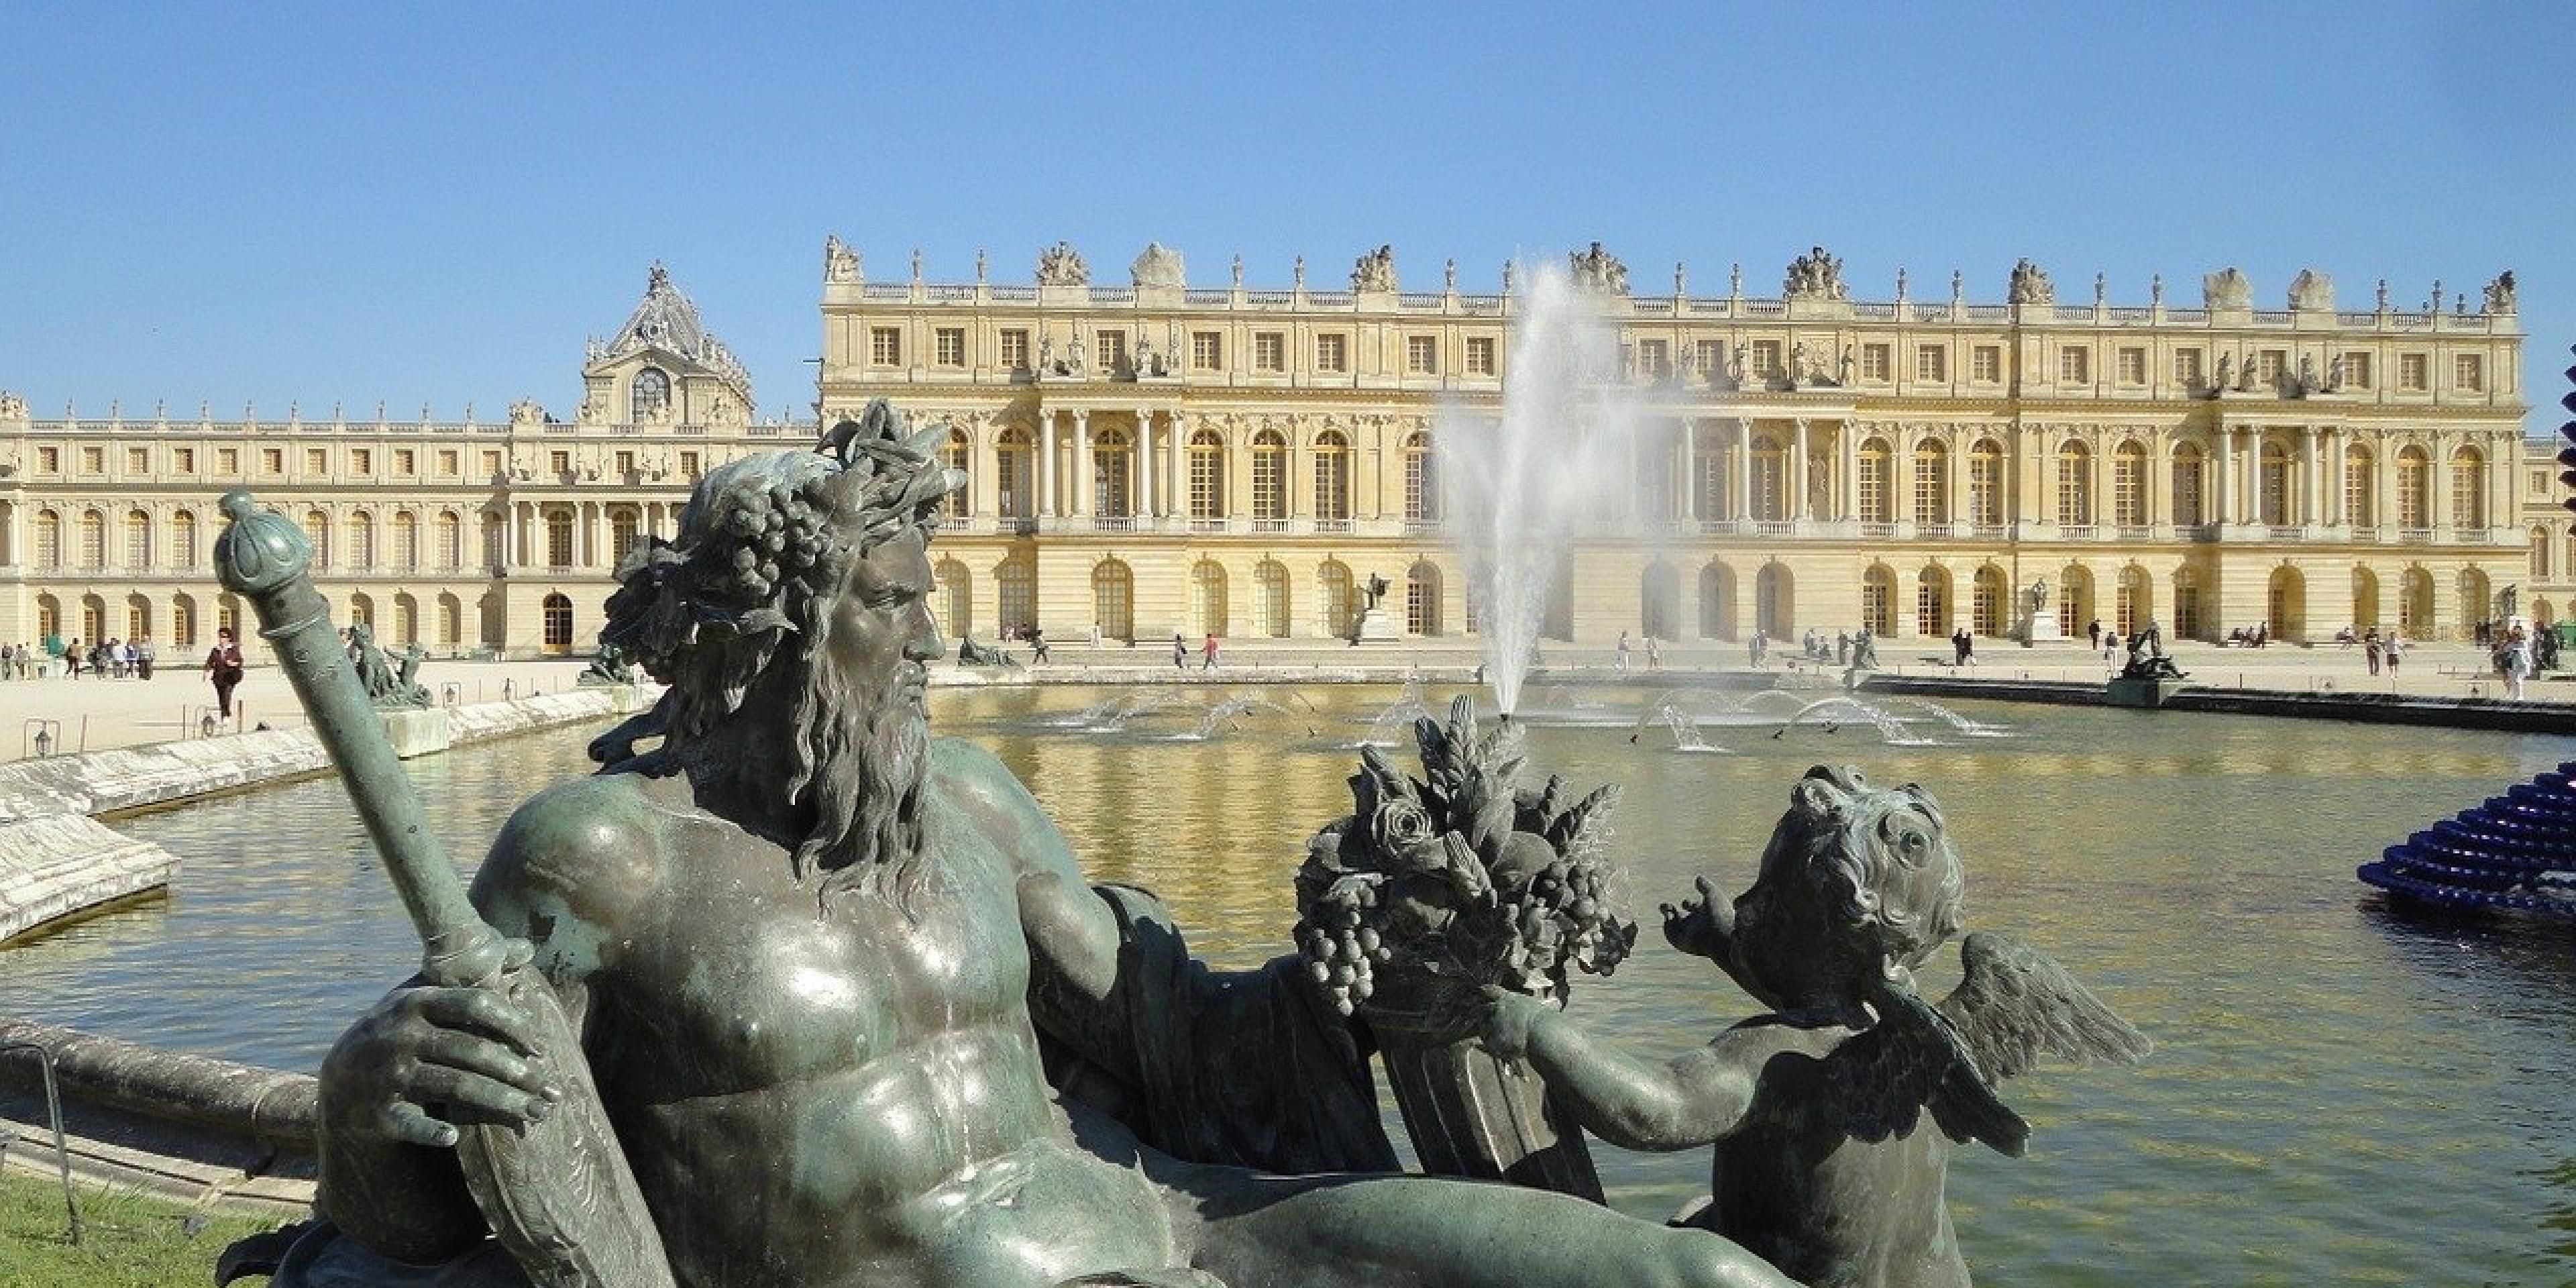 Our hotel is the best location for a visit to the Palace of Versailles & its sumptuous gardens. And check out all that to do in its surroundings. Tips, free entry every 1st Sunday of each month between November and March.